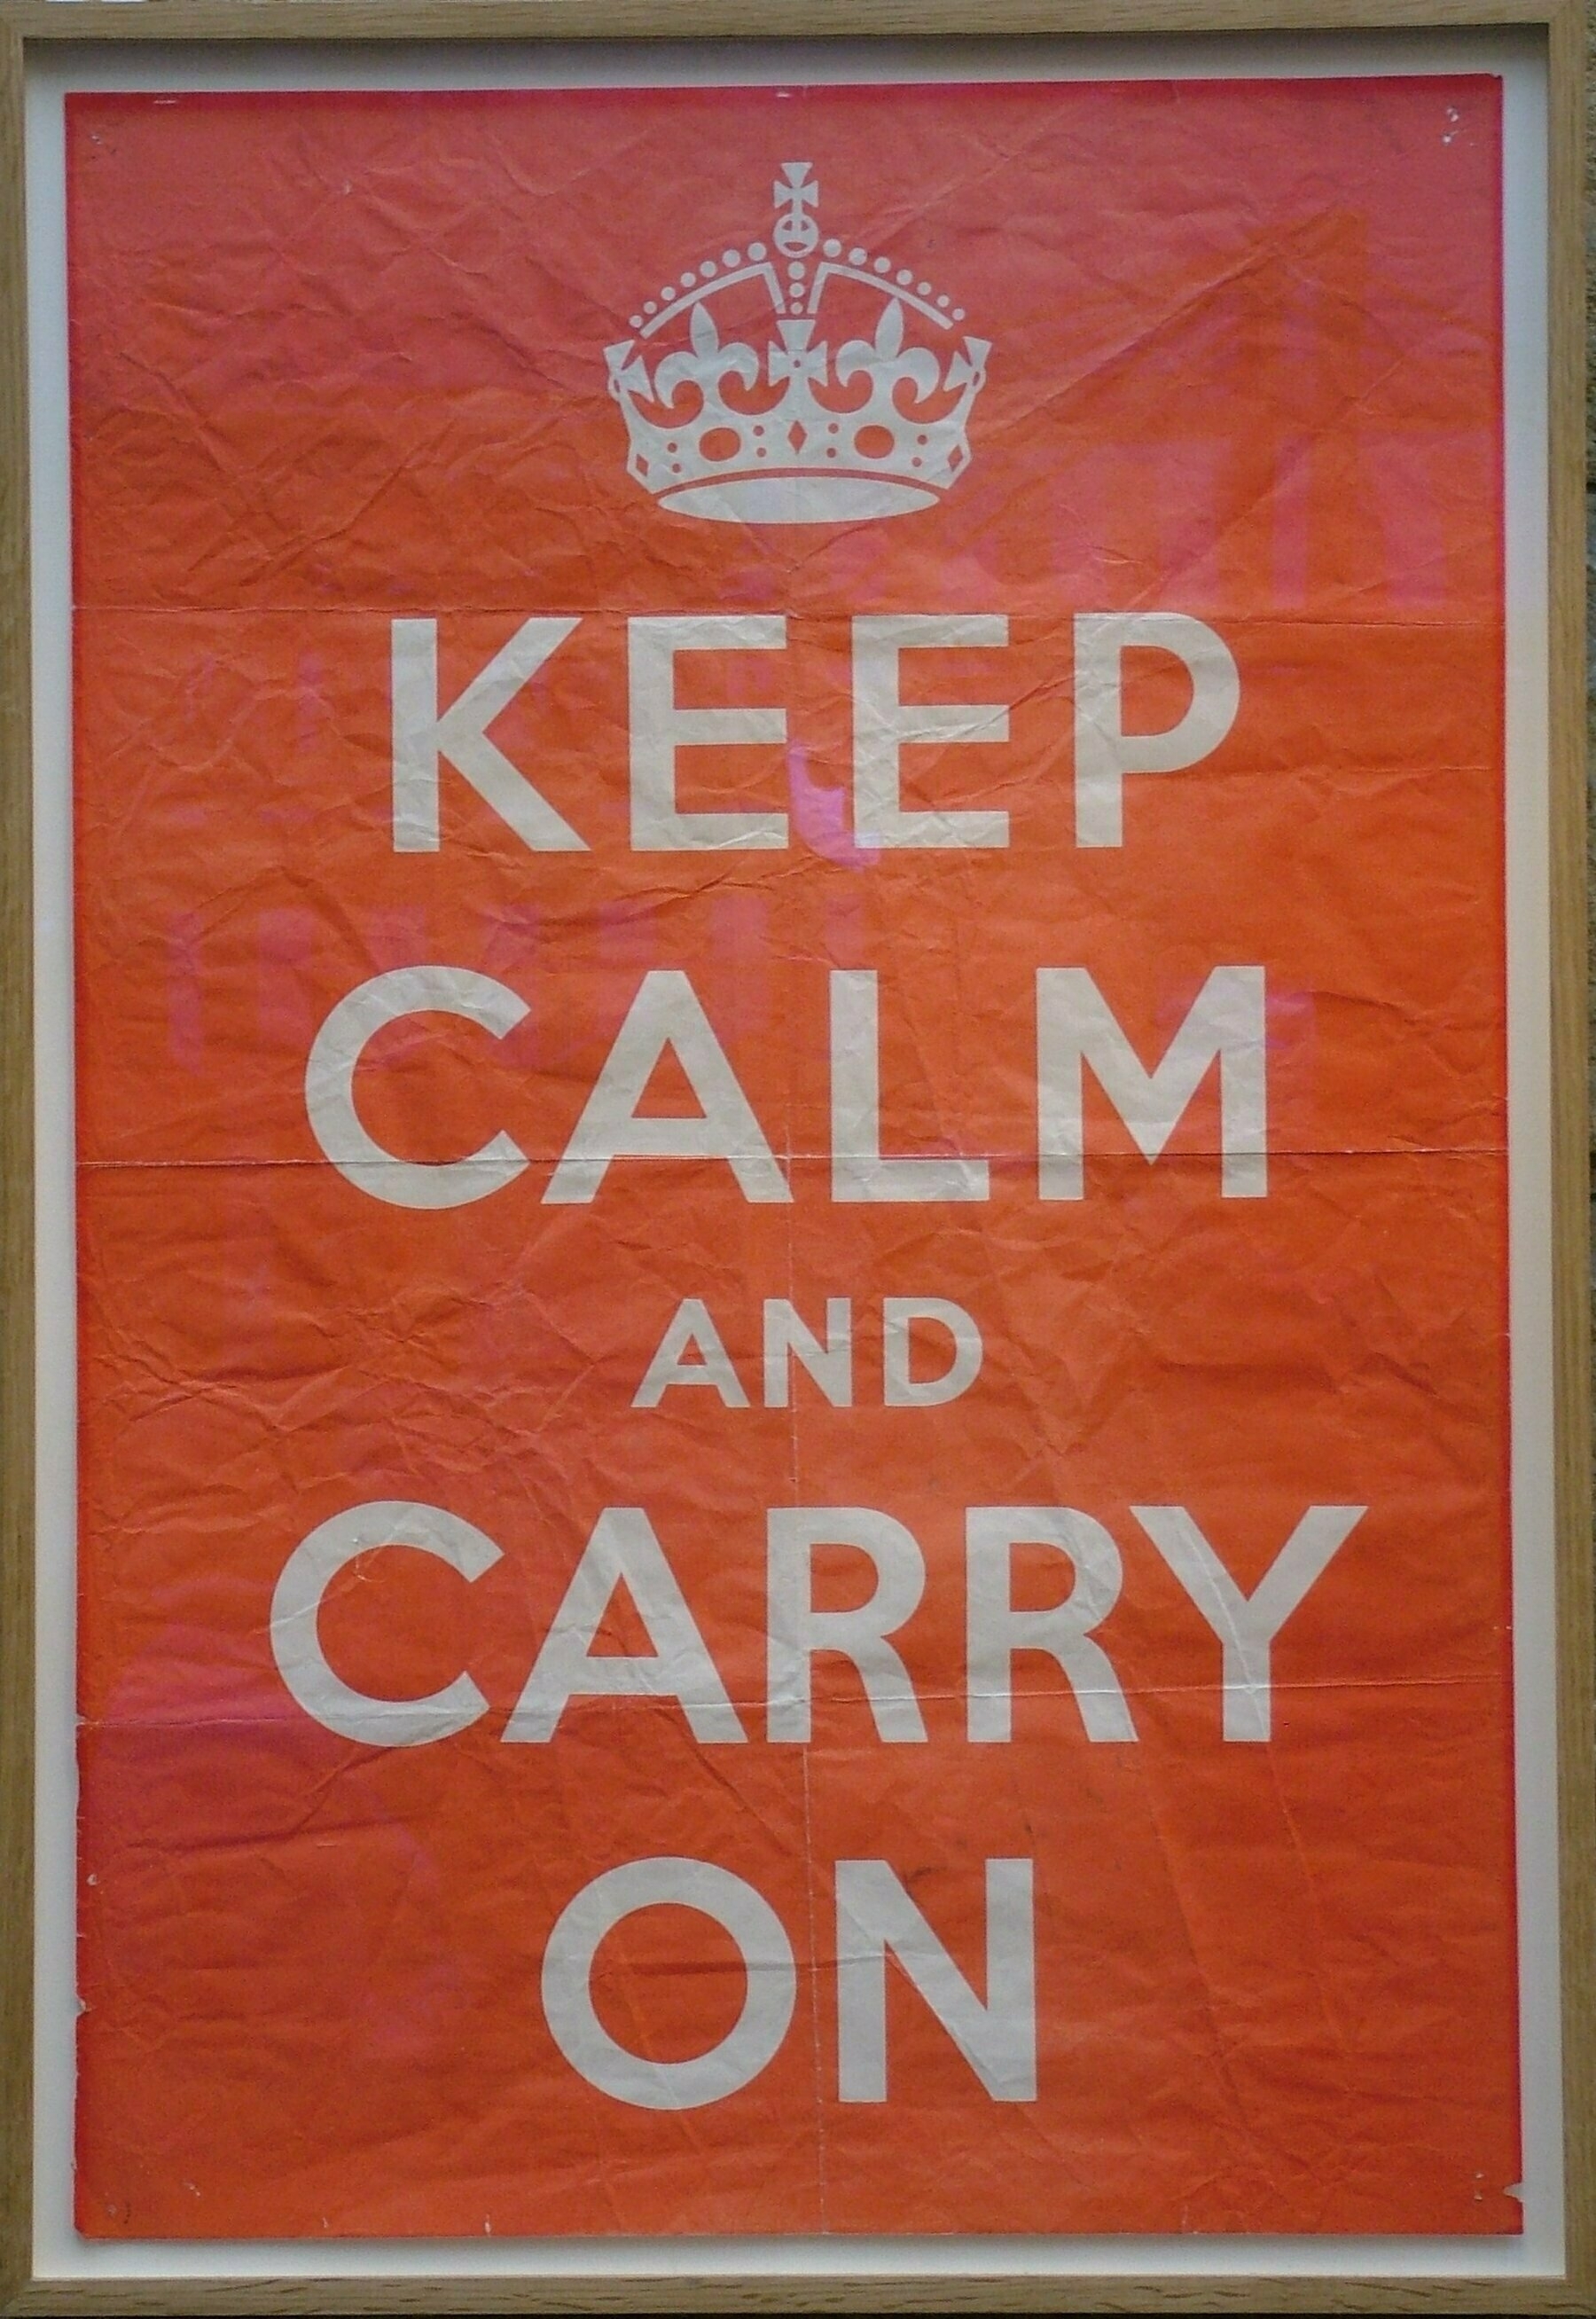 Photo of the 'Keep calm and carry on poster'